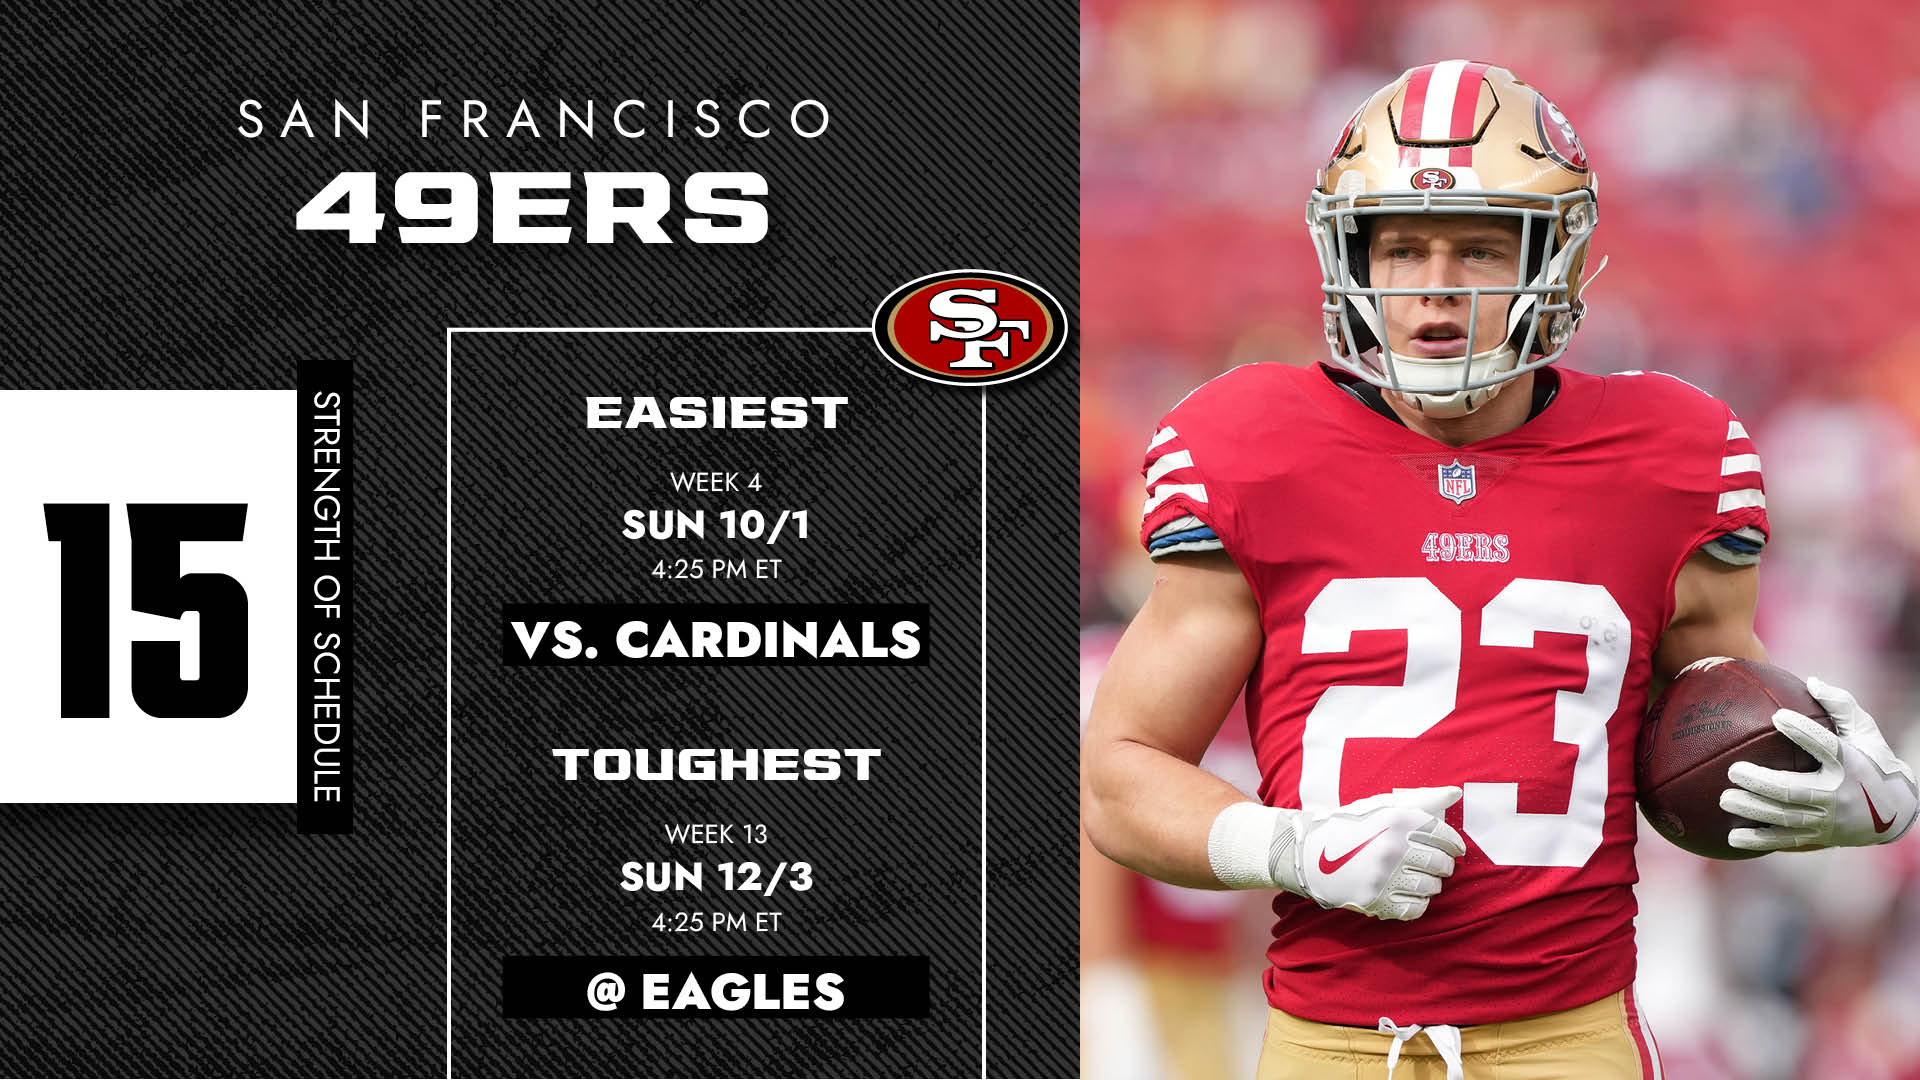 49ers play who today